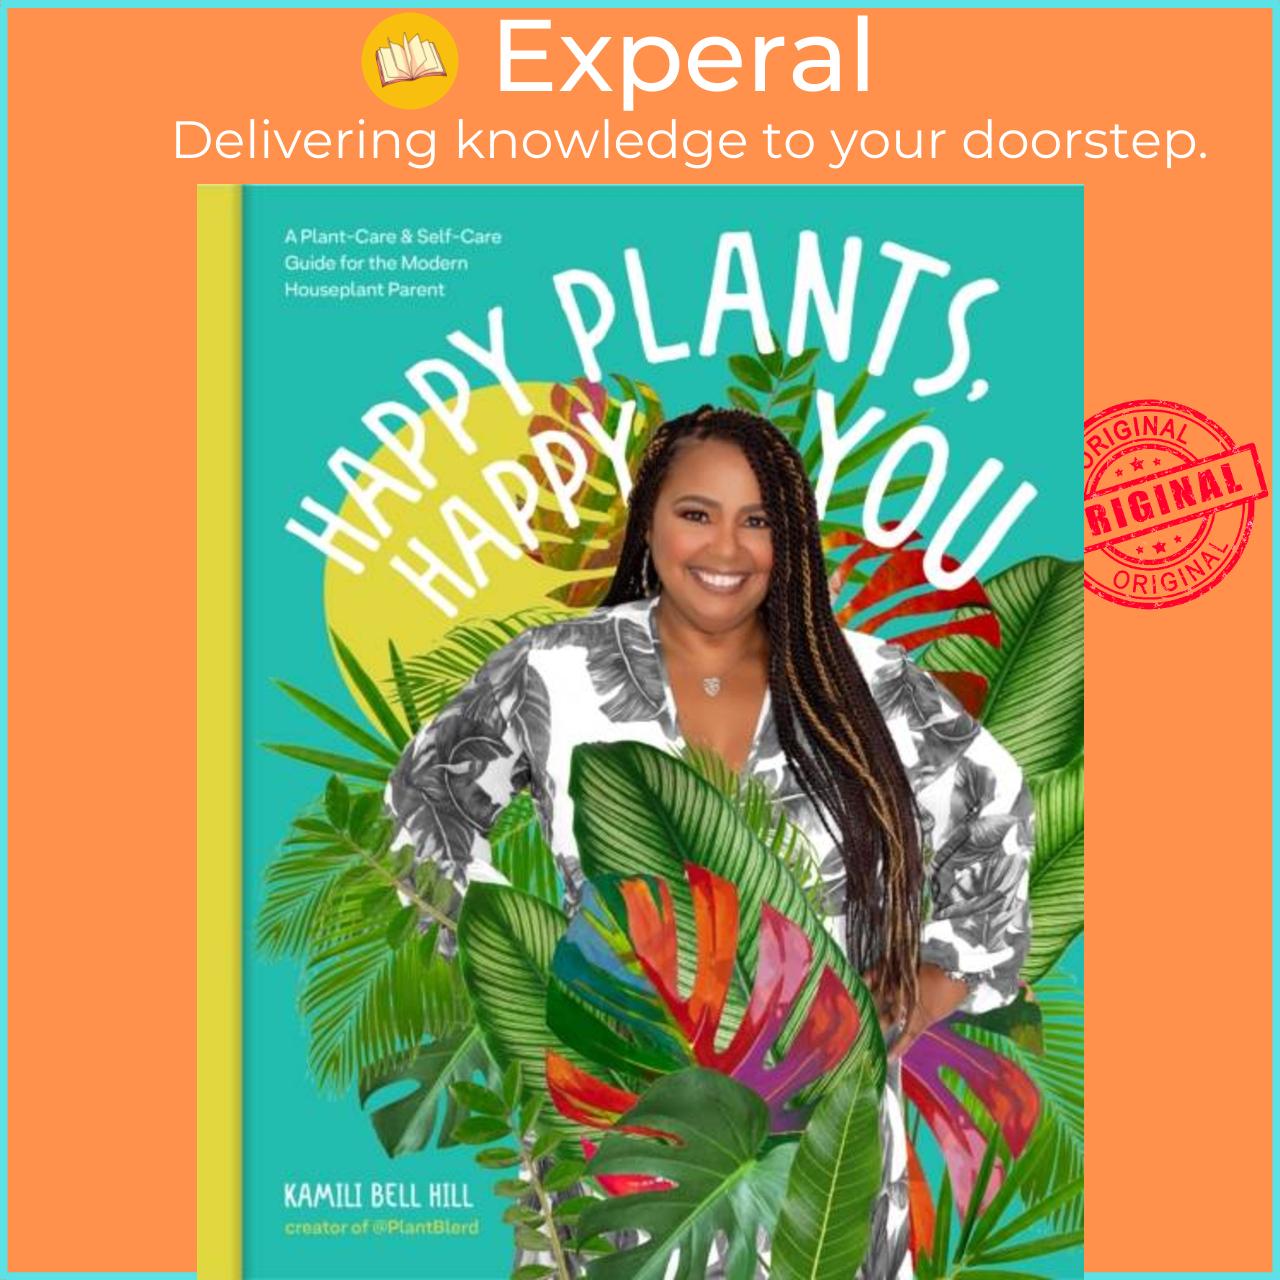 Sách - Happy Plants, Happy You - A Plant-Care & Self-Care Guide for the Mode by Kamili Bell Hill (UK edition, hardcover)